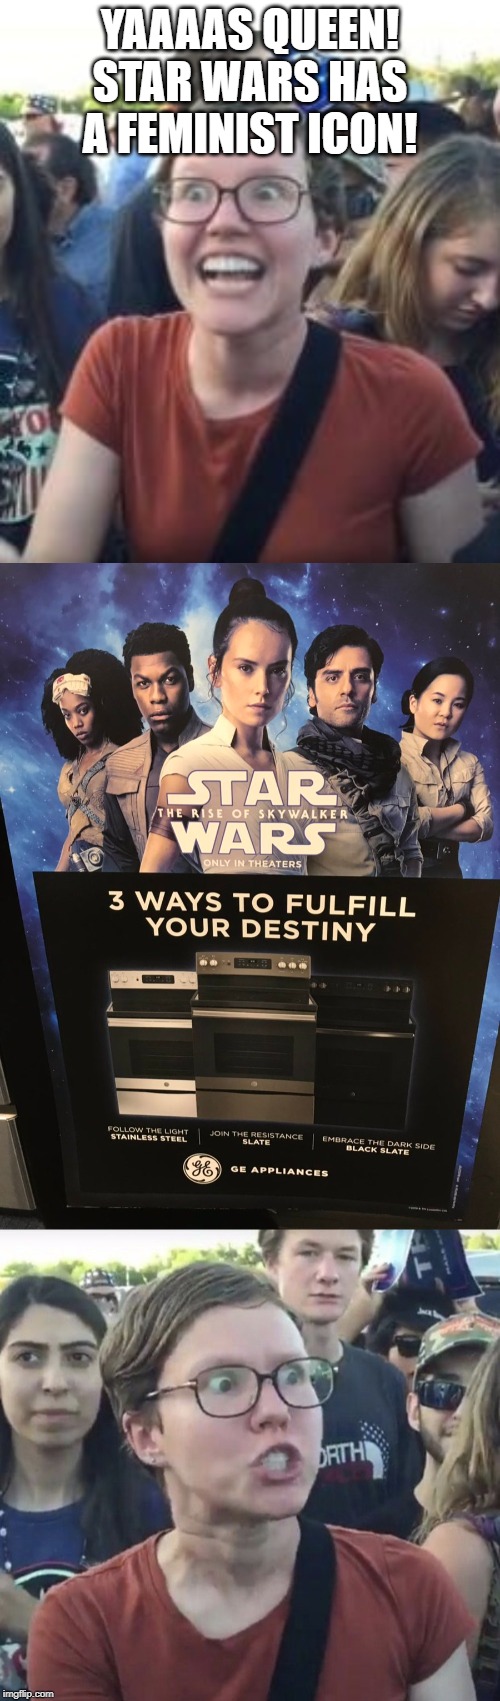 XD XD XD I can't even! This could be more triggering than that exercise bike commercial! | YAAAAS QUEEN!
STAR WARS HAS A FEMINIST ICON! | image tagged in triggered feminist,happy feminist triggered feminist,star wars,feminism,kitchen,stove | made w/ Imgflip meme maker